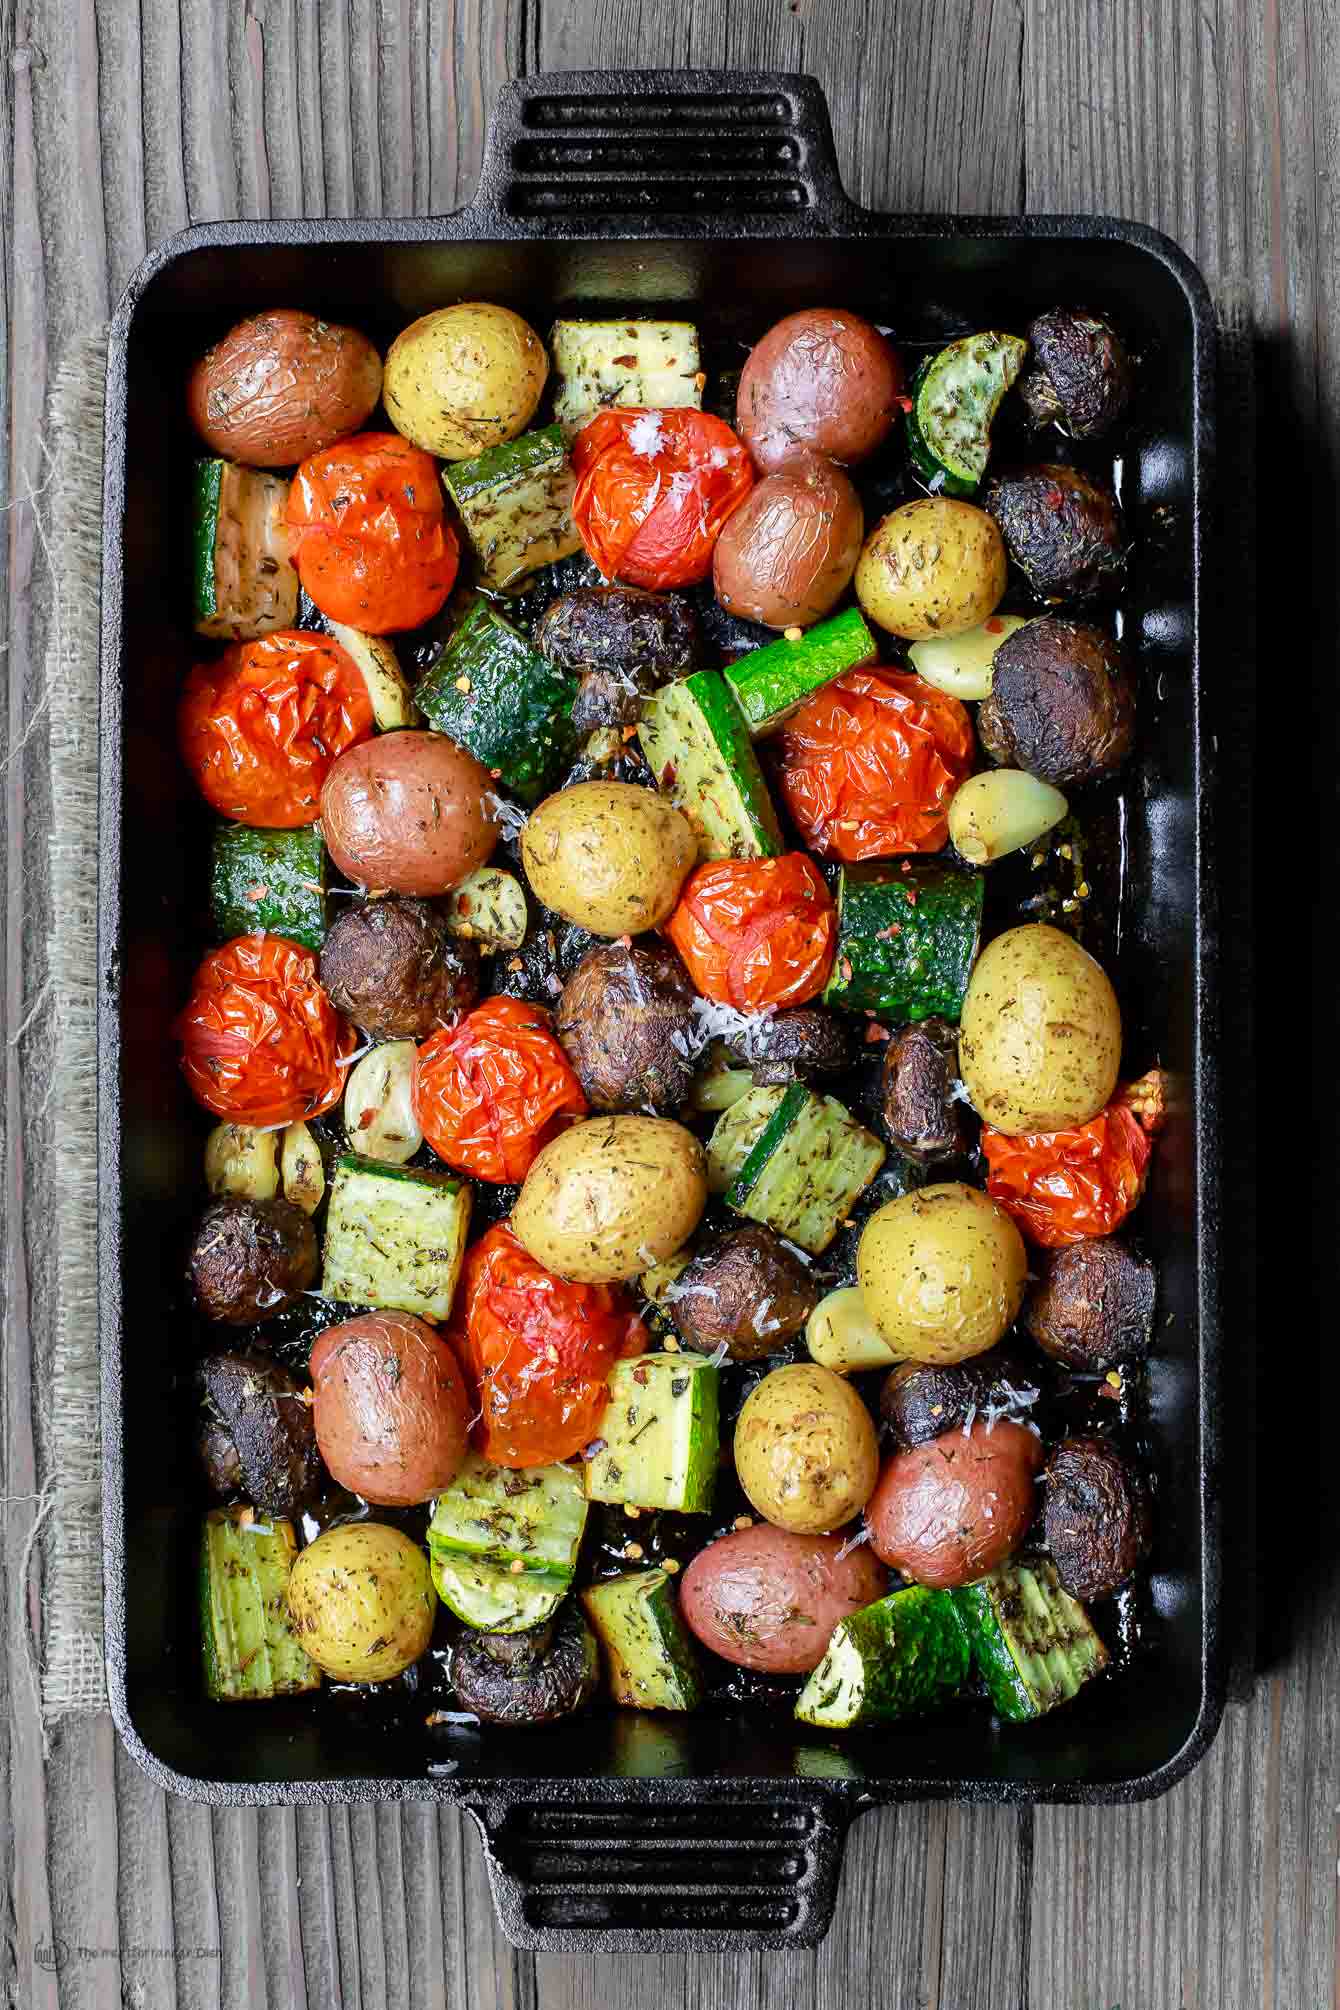 Oven Roasted Vegetables including zucchini, tomatoes, potatoes and mushrooms